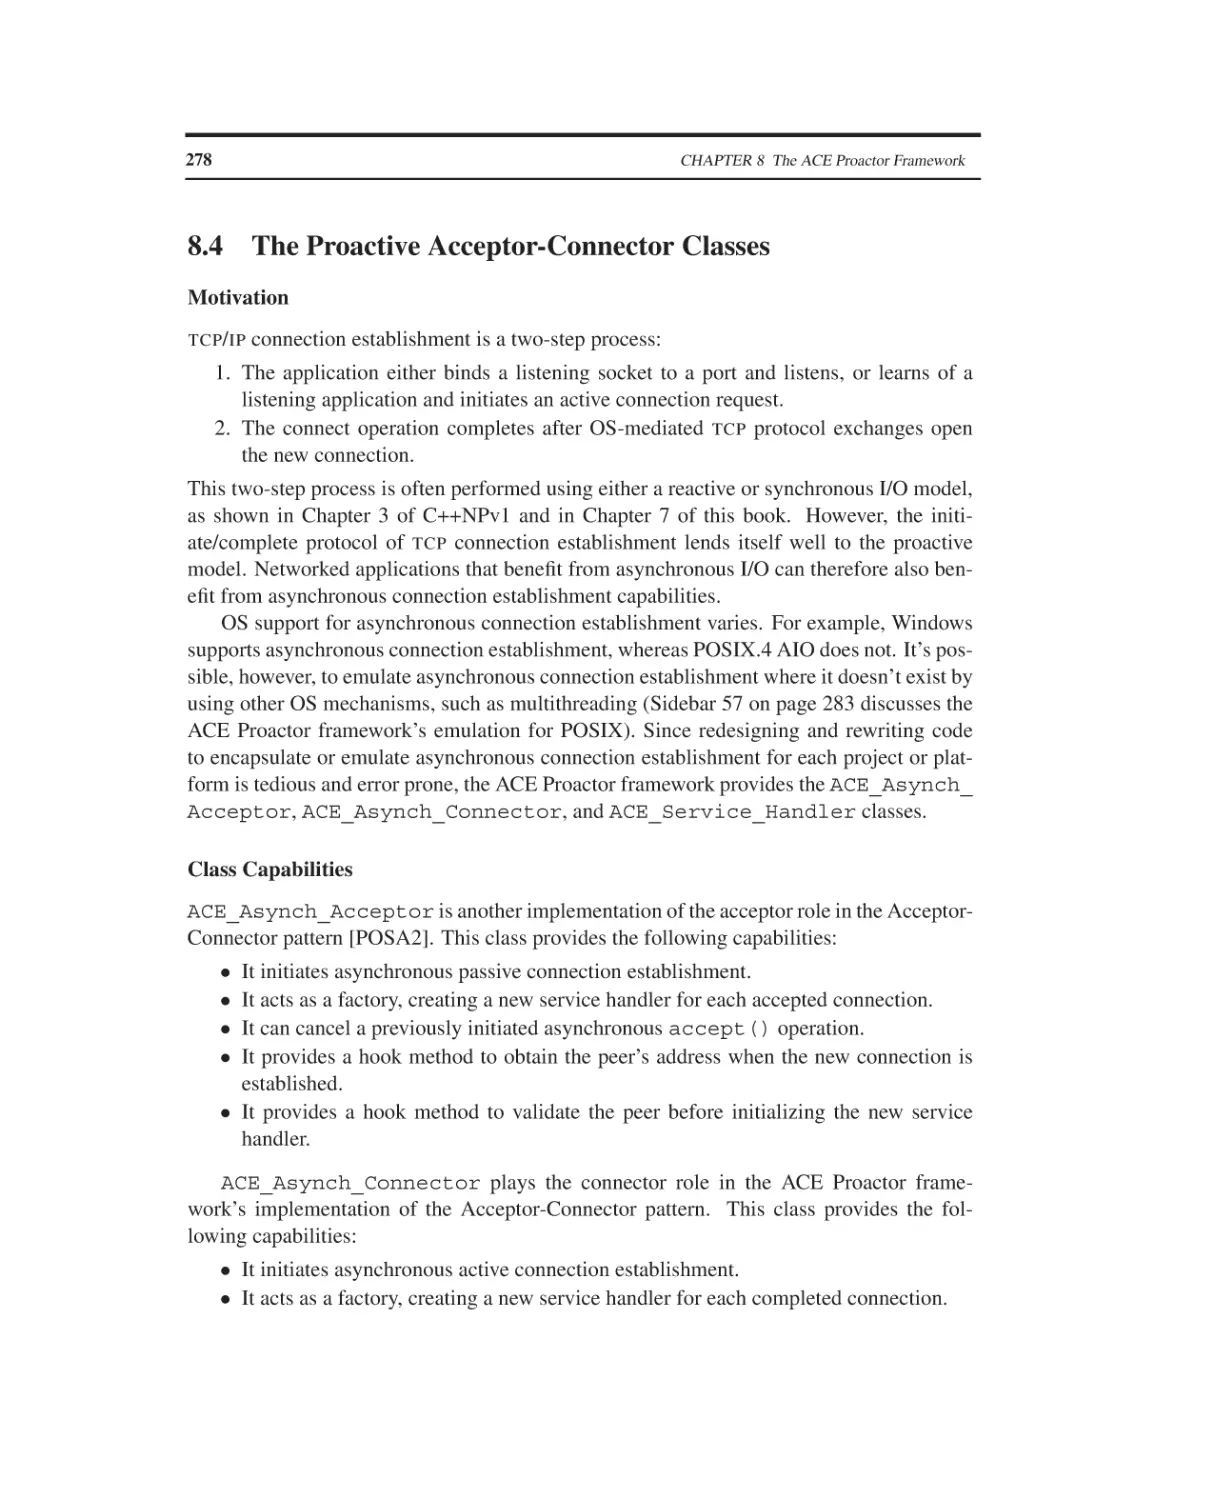 8.4 The Proactive Acceptor-Connector Classes